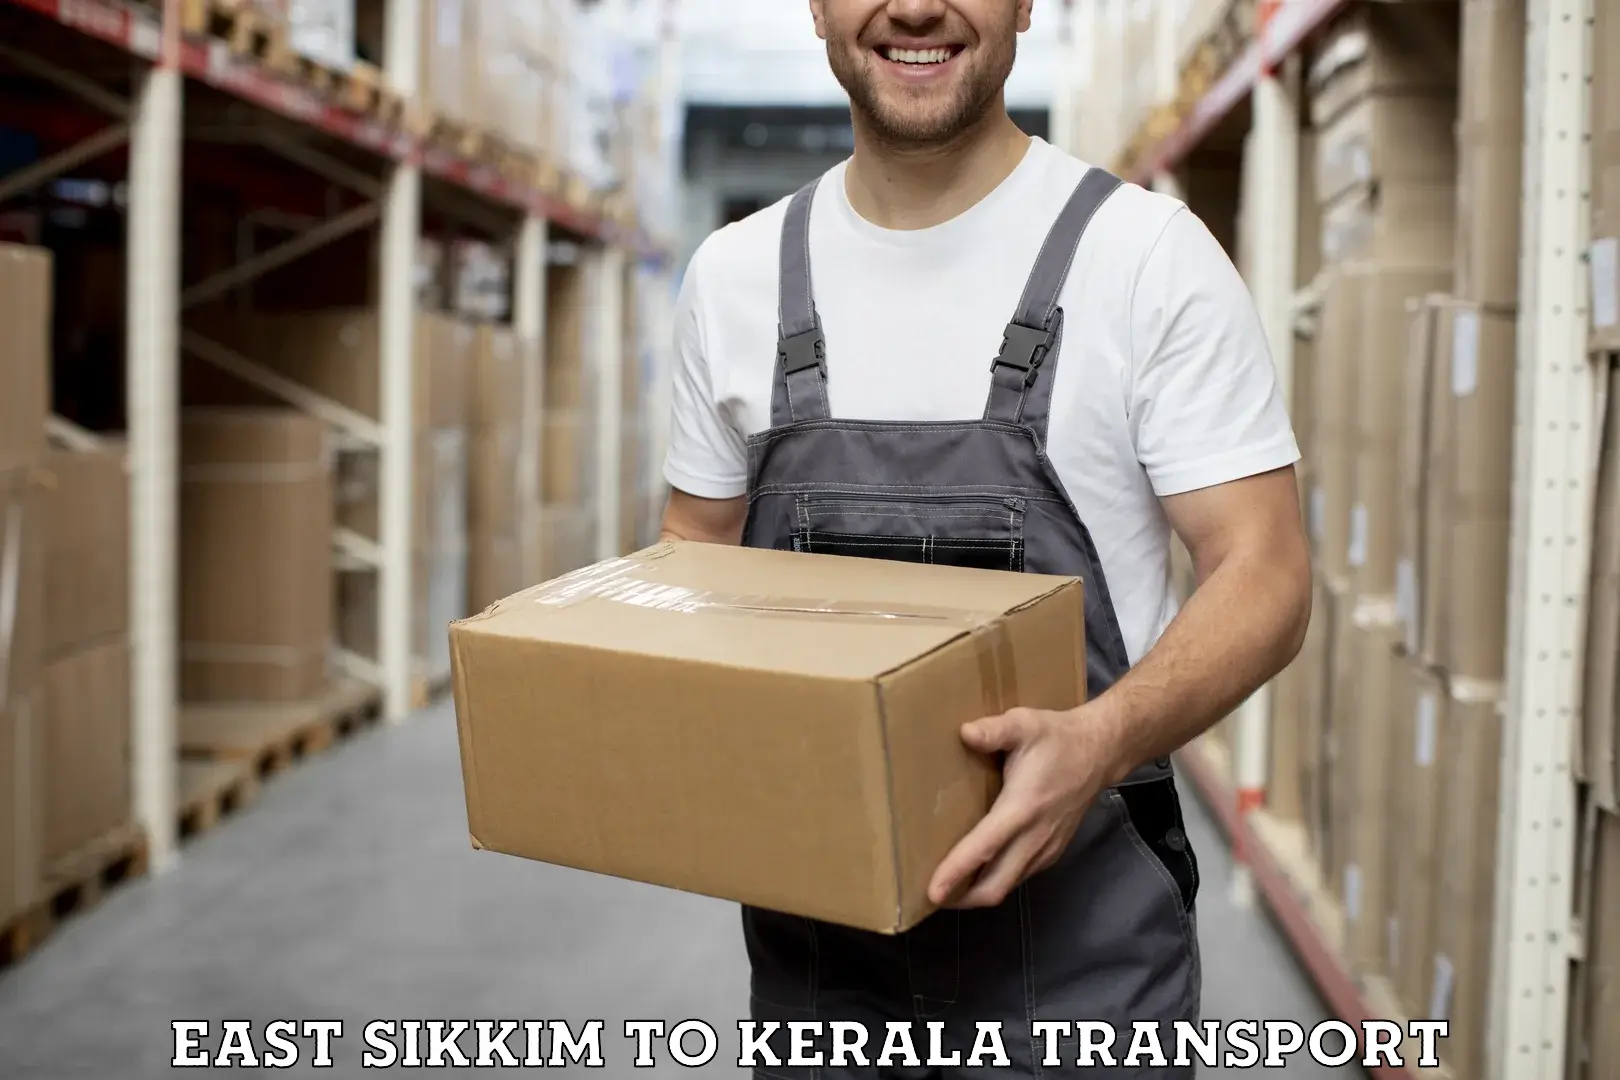 Commercial transport service East Sikkim to Kerala